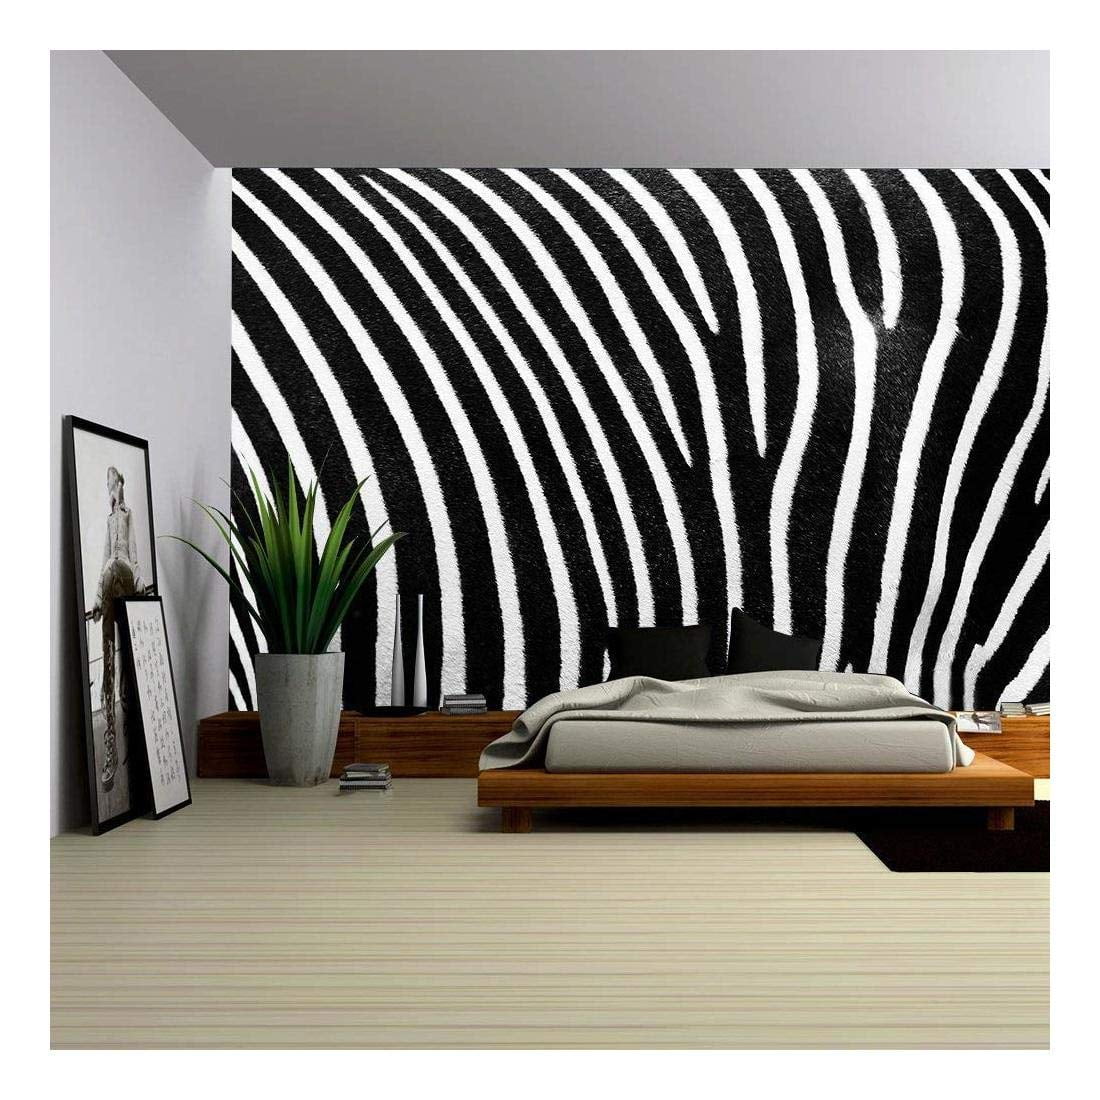 wall26 Self-adhesive Large Wallpaper Black and White Fabric Creates a